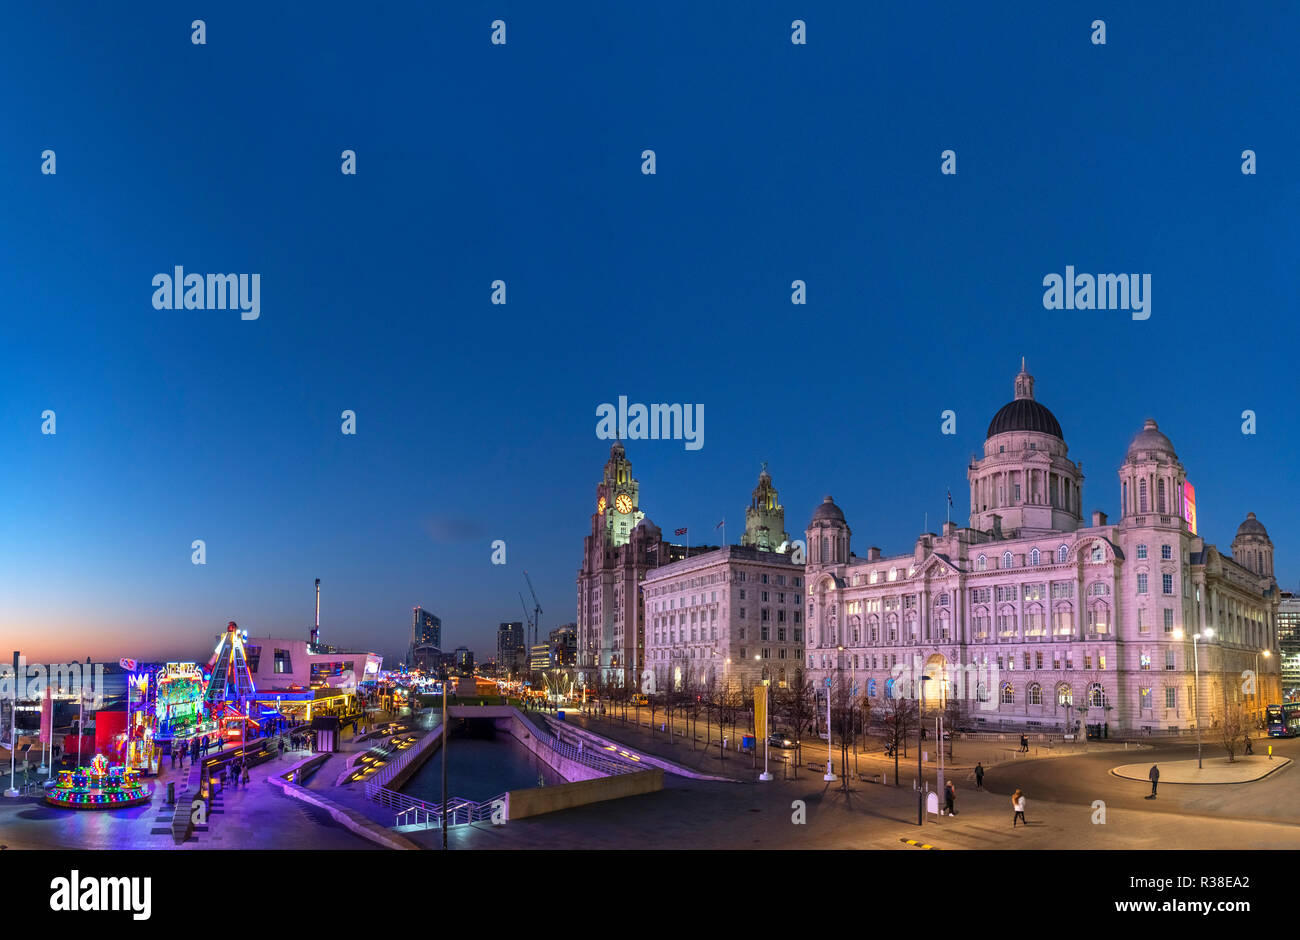 The Christmas Ice Festival fairground and Three Graces at night, Pier Head, Liverpool, England, UK Stock Photo